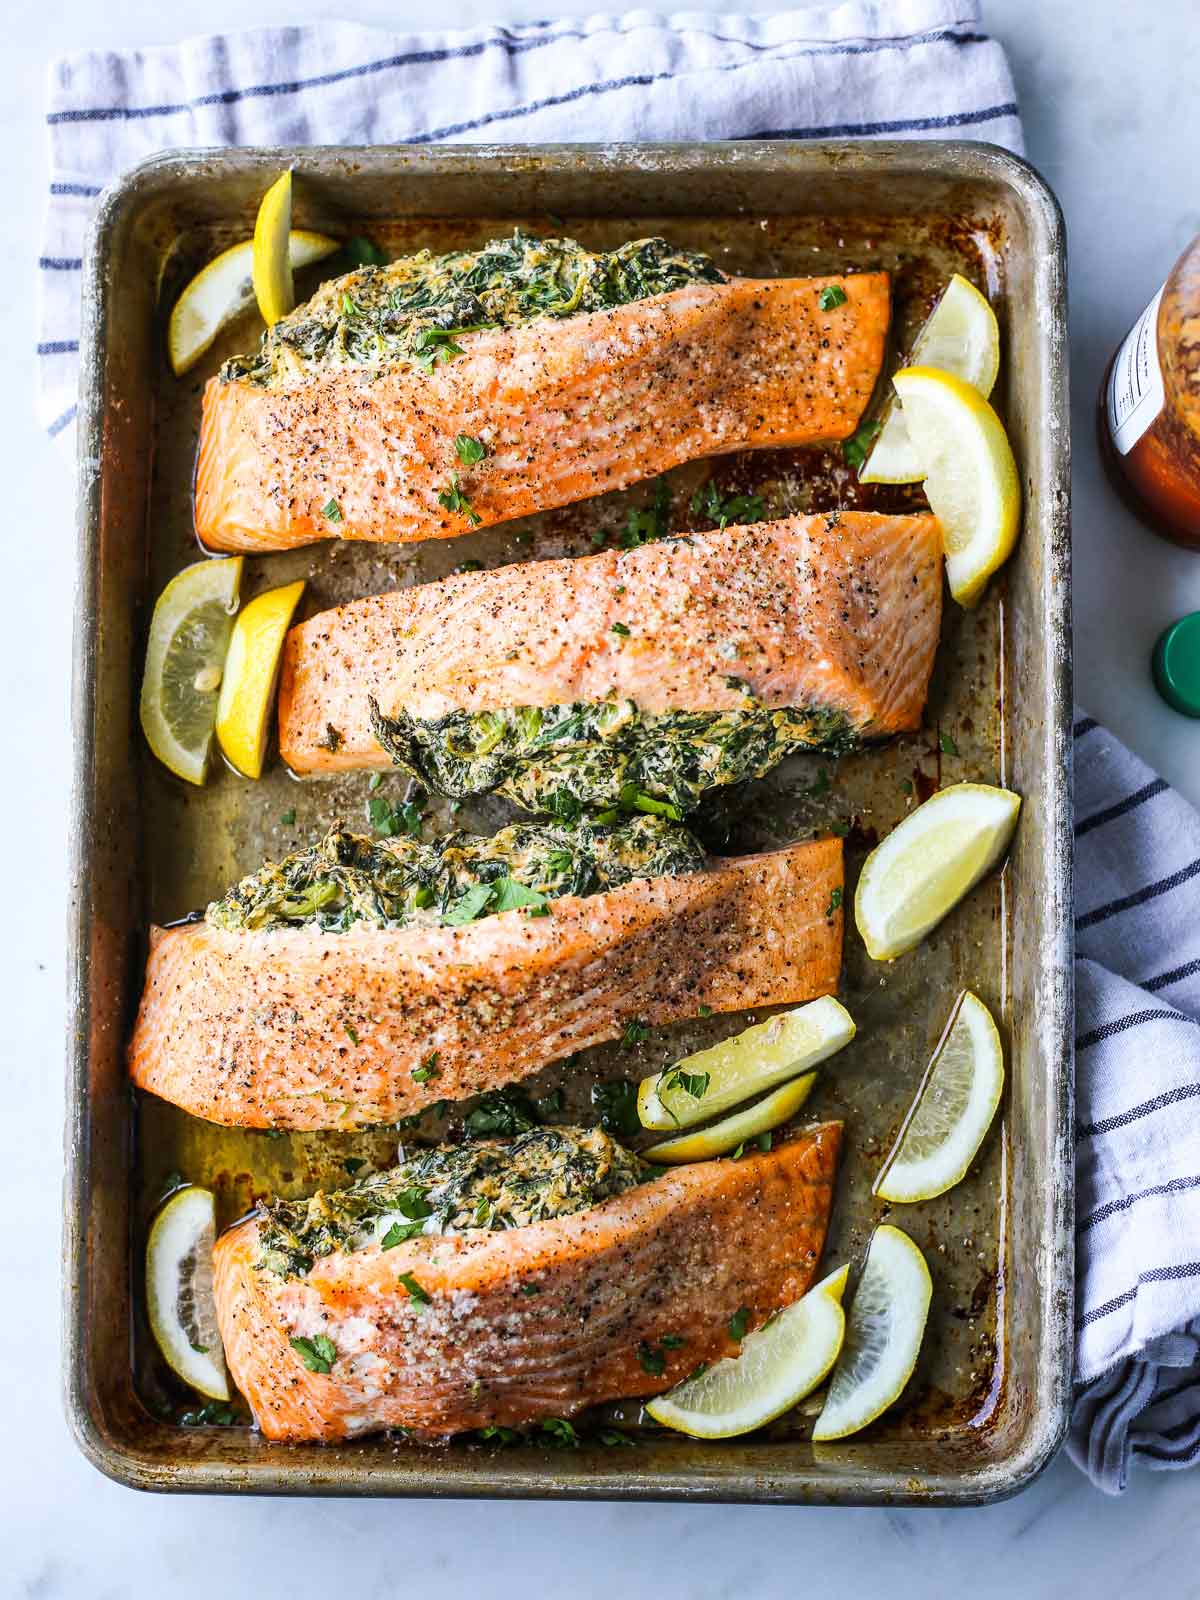 50 BEST Salmon Recipes (Top-Rated!) | foodiecrush.com